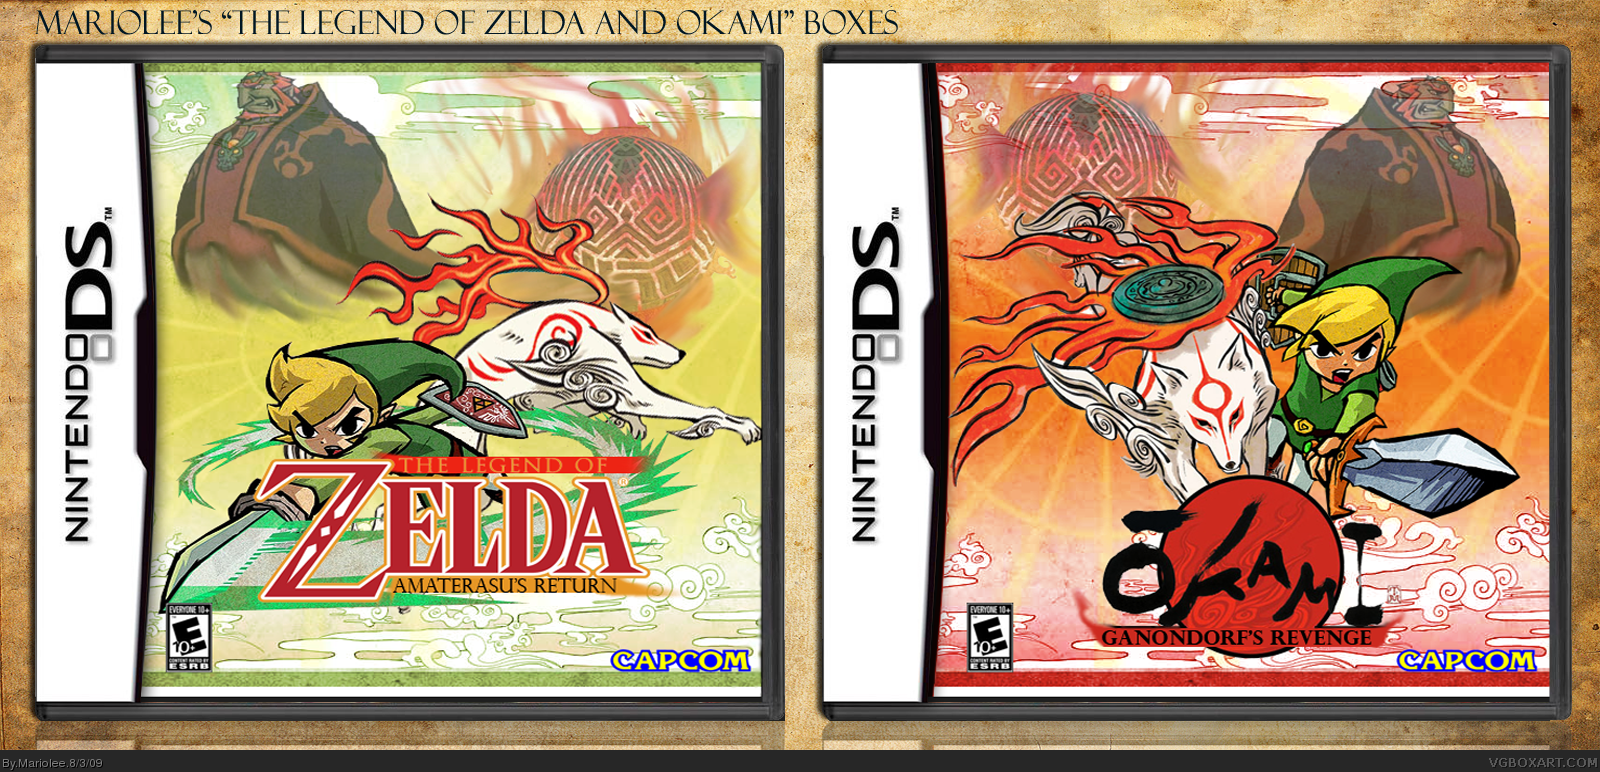 The Legend of Zelda and Okami DS box cover